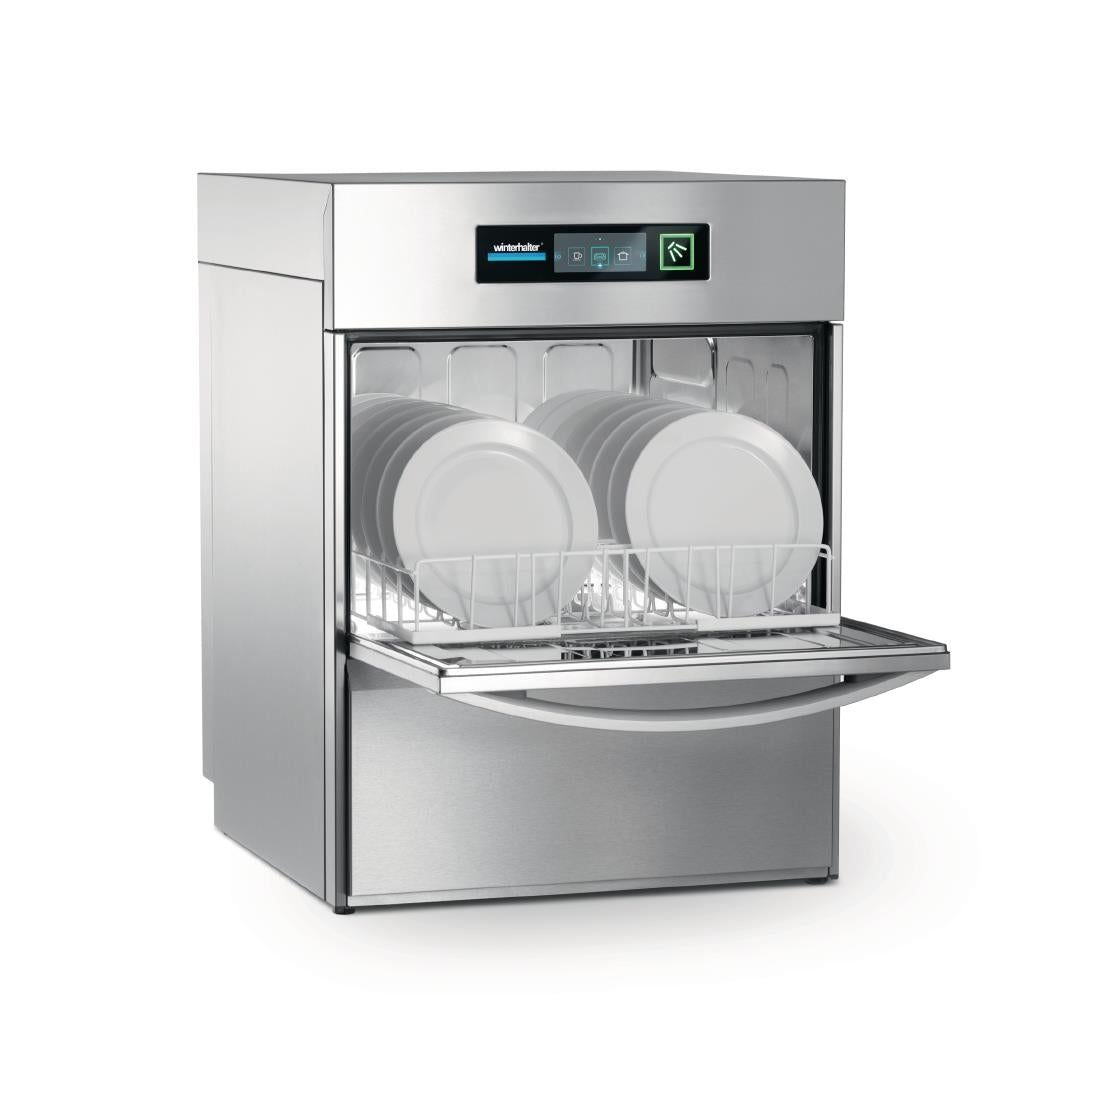 Winterhalter Undercounter Dishwasher UC-M-E Energy with Install